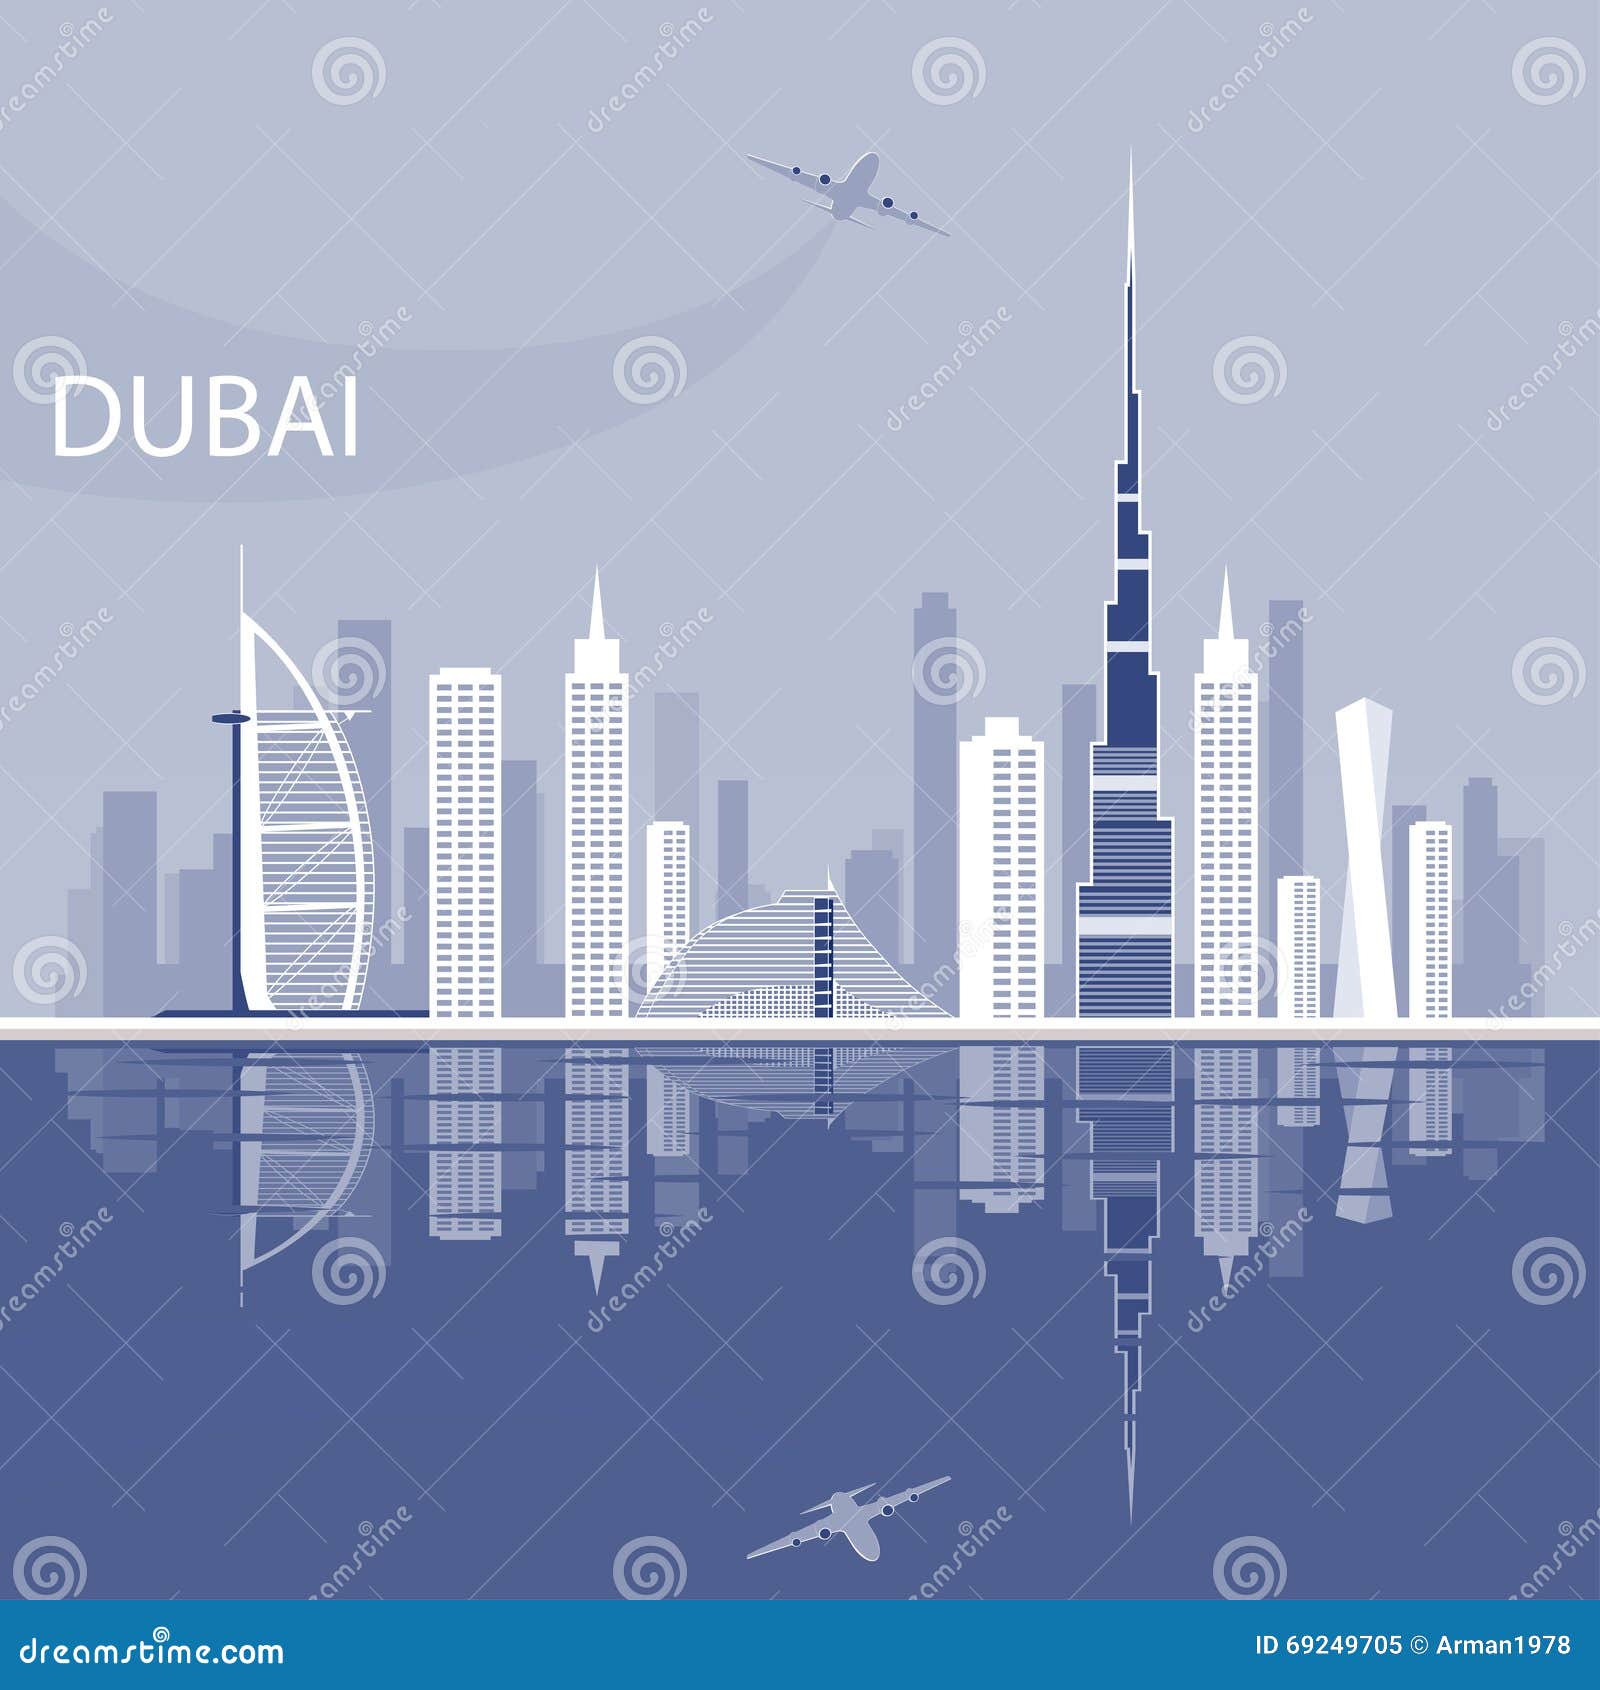 Dubai - the Largest City in the United Arab Emirates, the ...